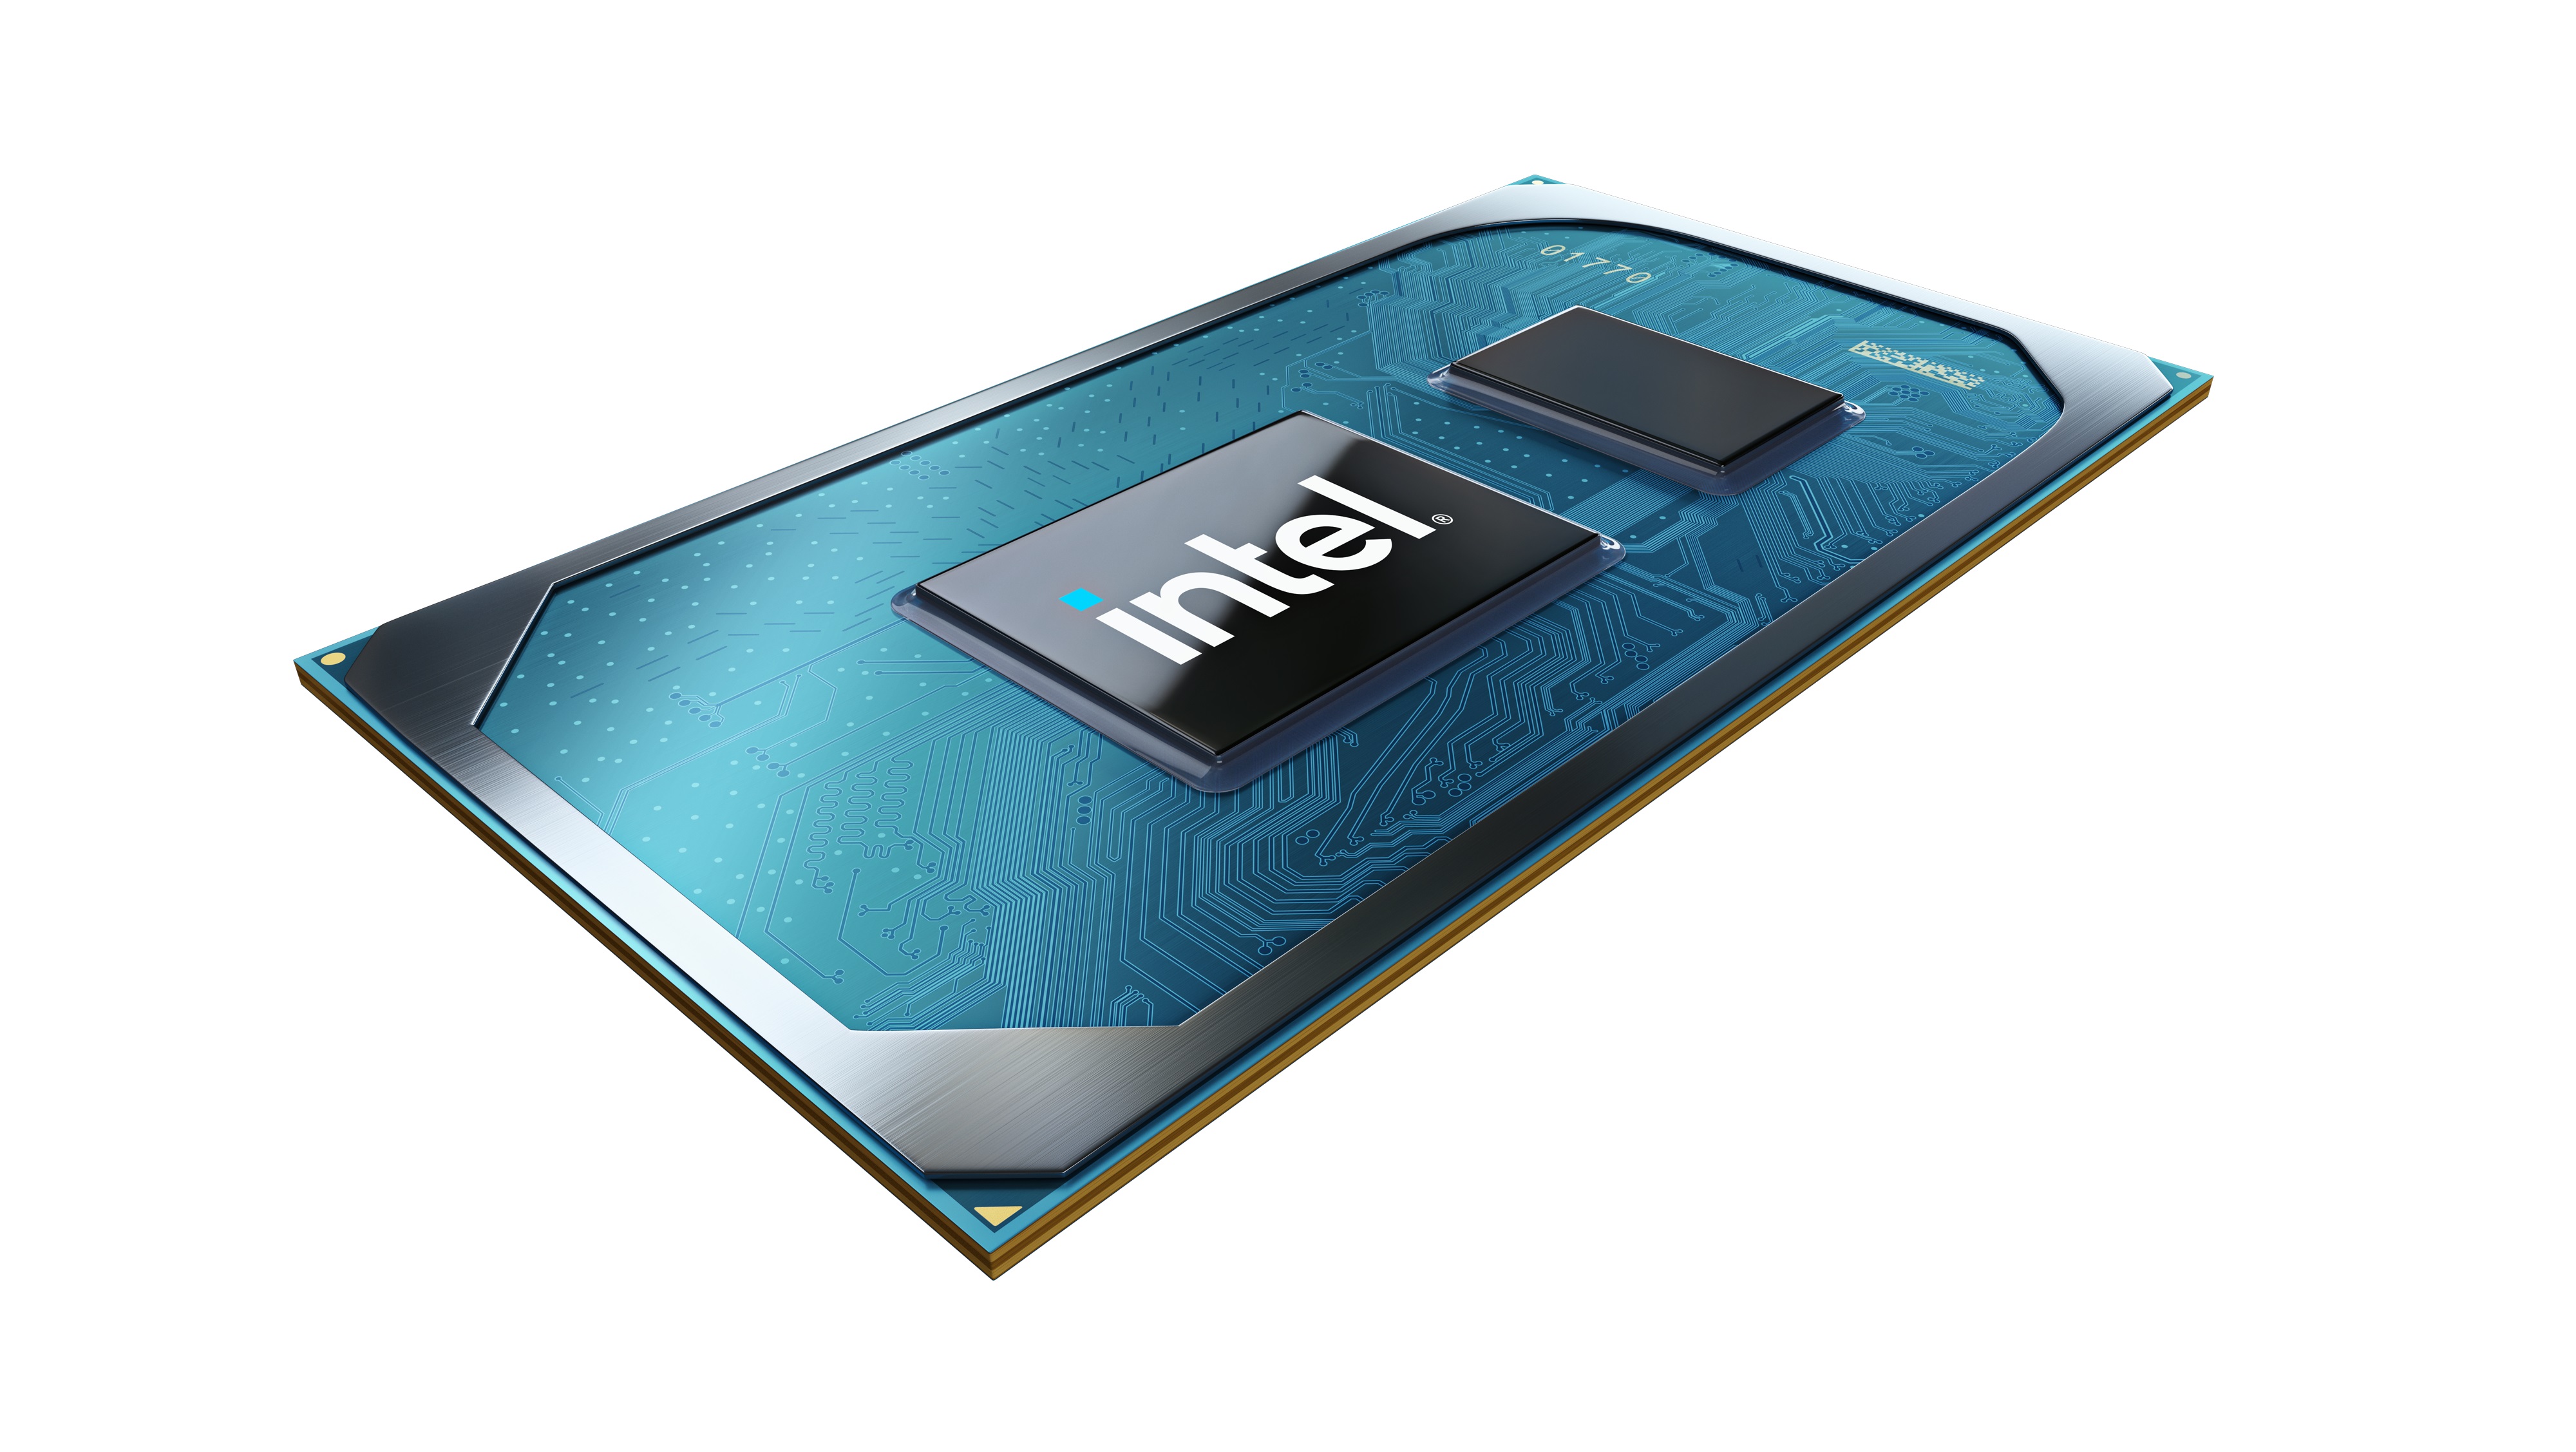 Intel Core i3-1115G4 Processor - Benchmarks and Specs